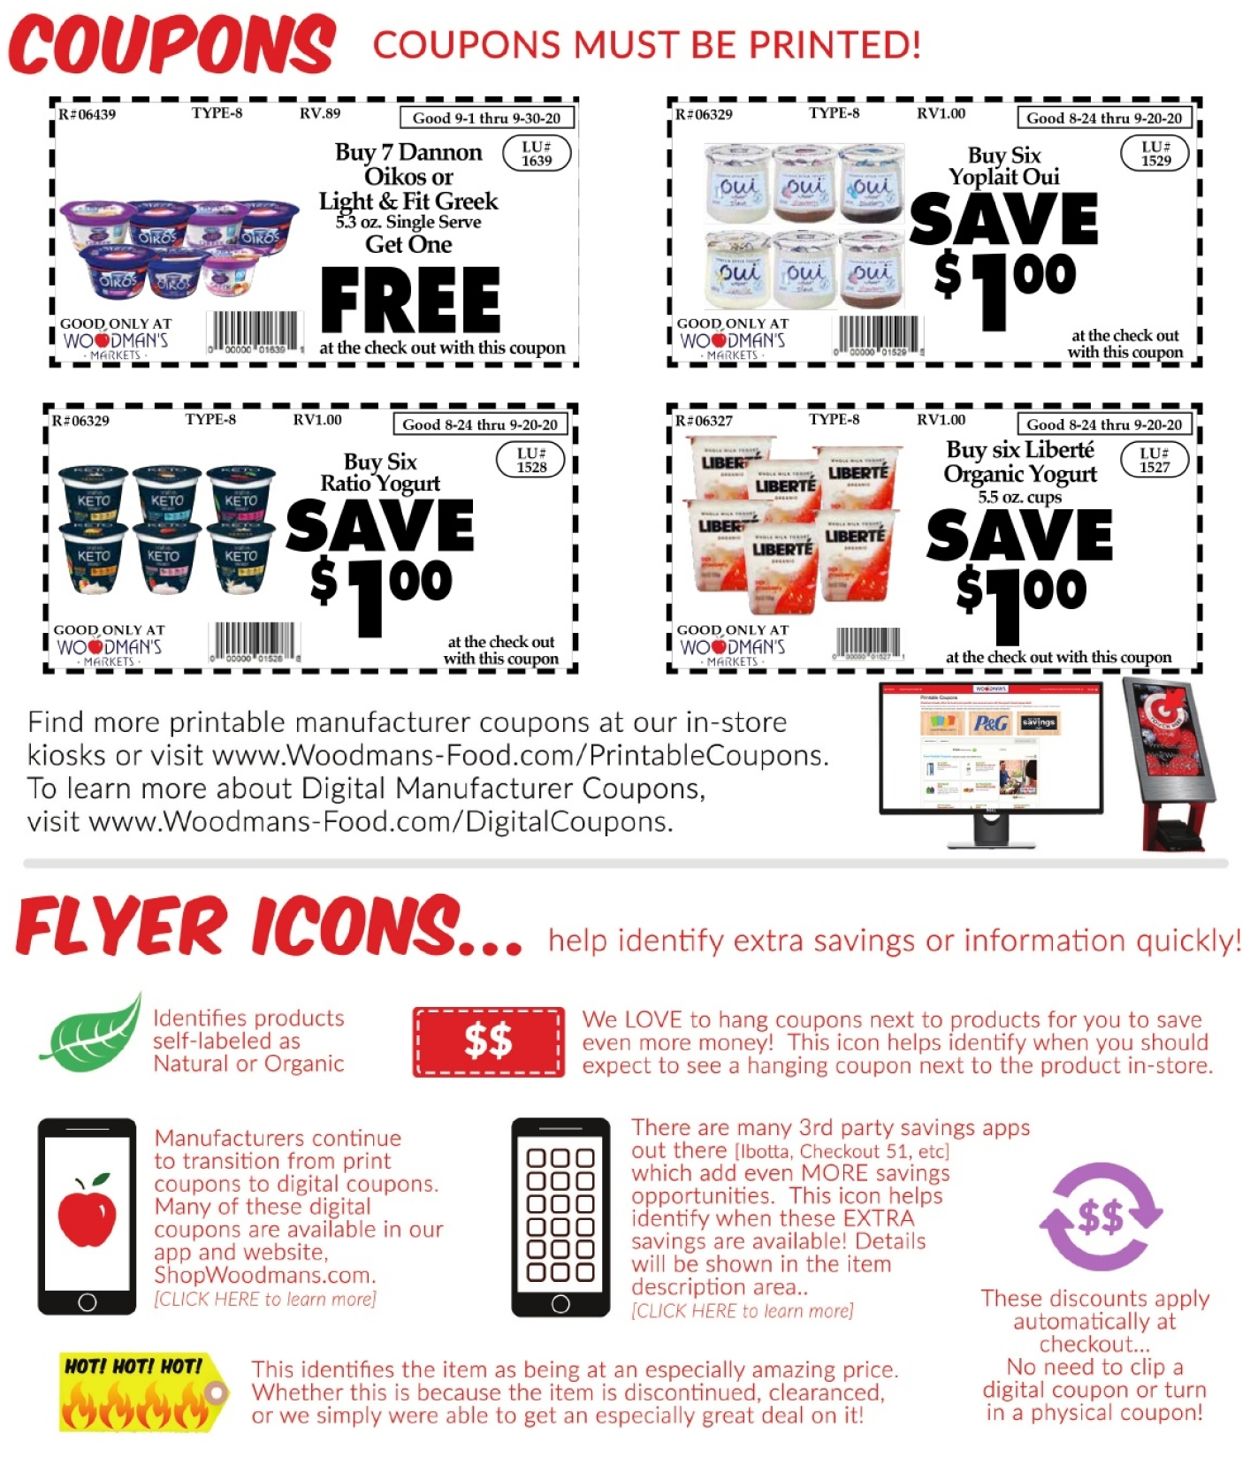 Woodman's Market Ad from 09/03/2020